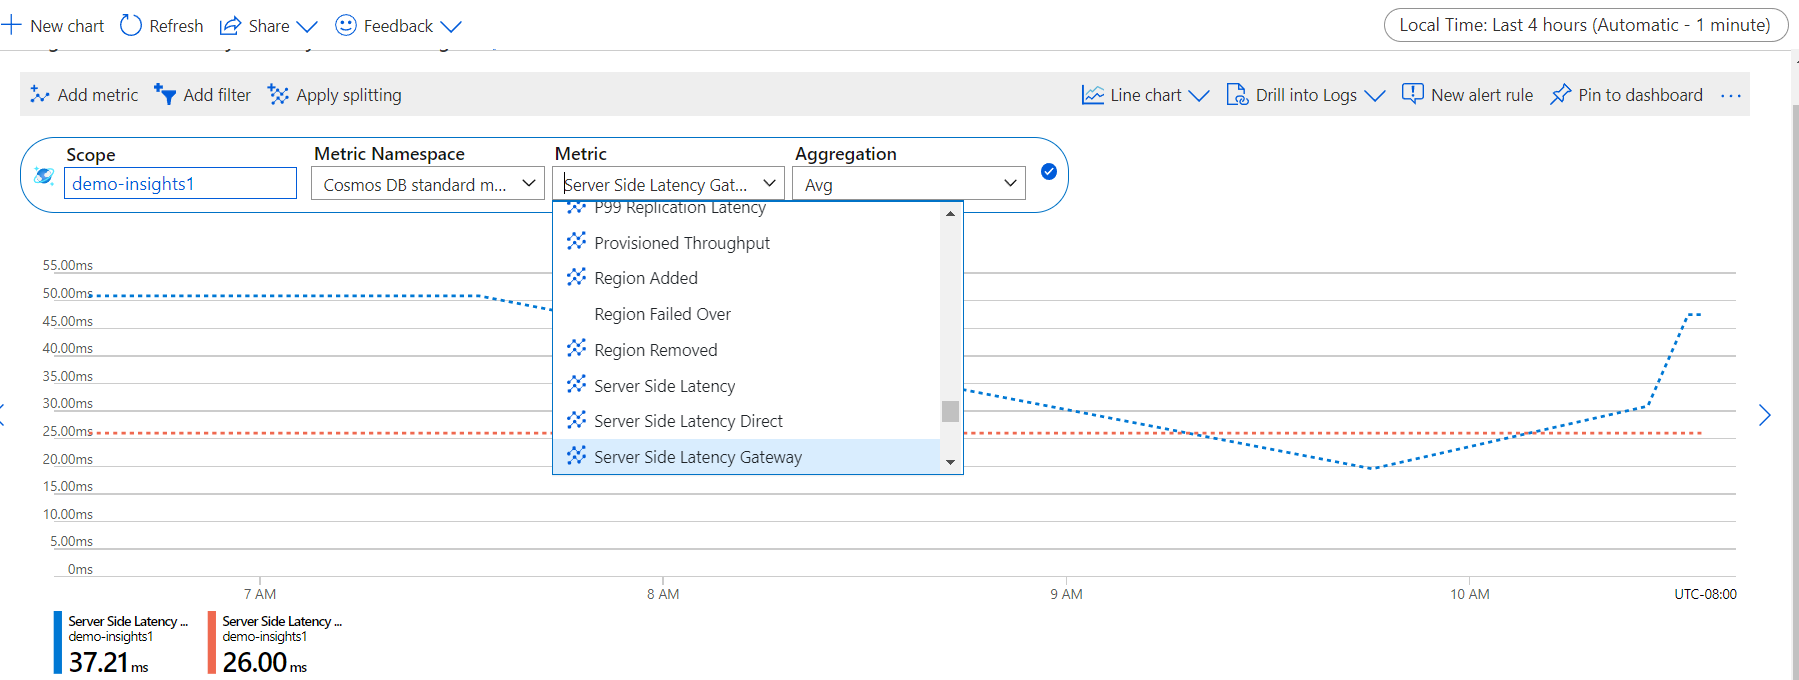 Choose the Server-Side Latency Gateway metric from the Azure portal